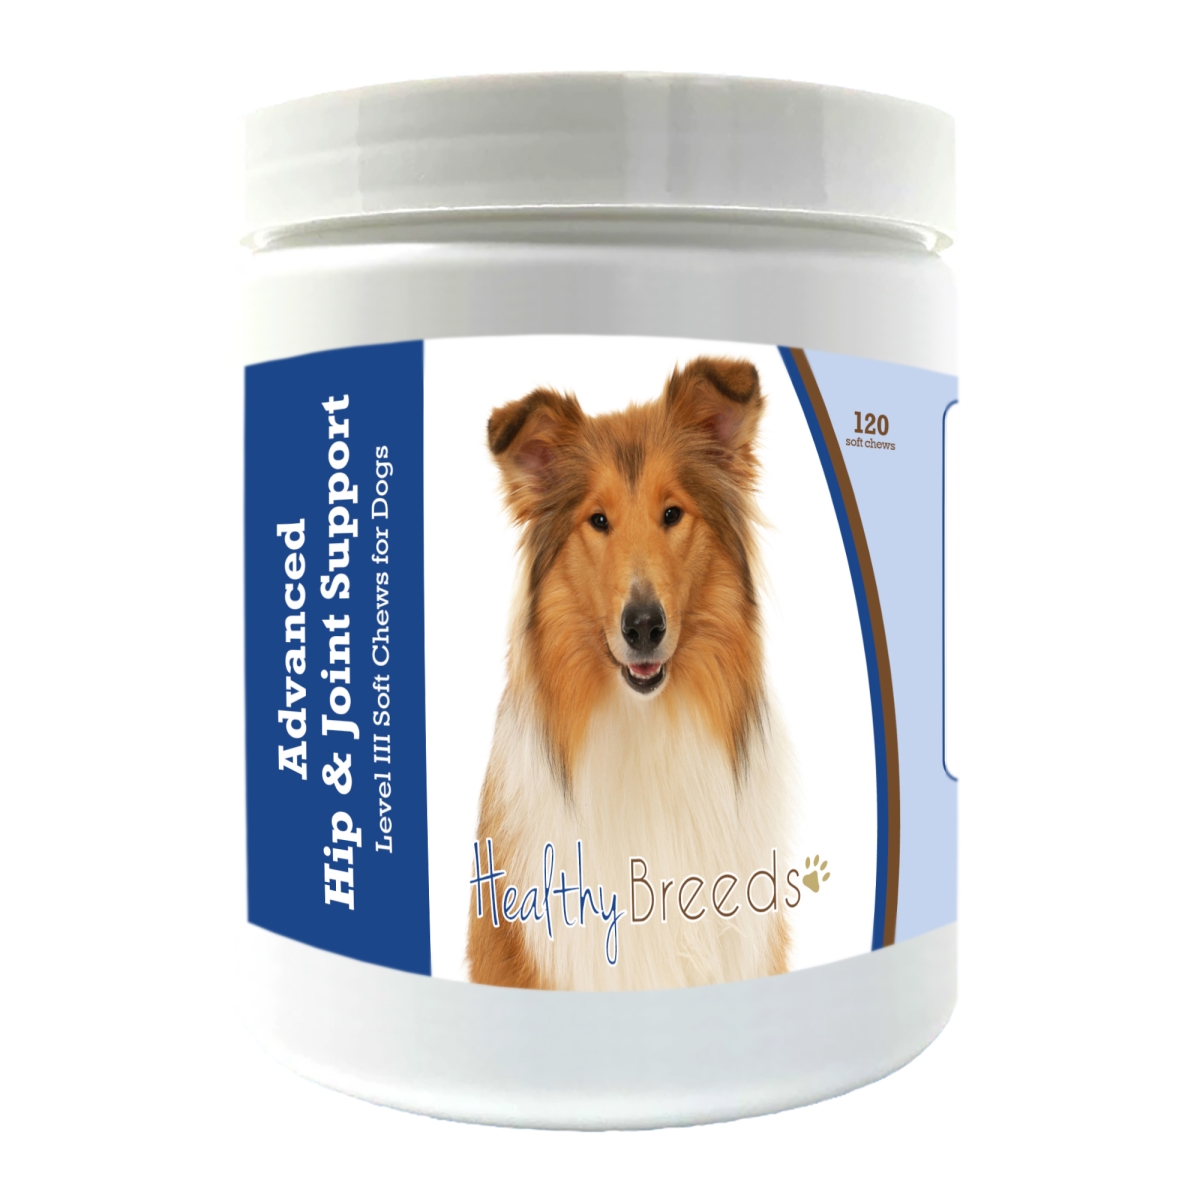 Picture of Healthy Breeds 192959897982 Collie Advanced Hip & Joint Support Level III Soft Chews for Dogs